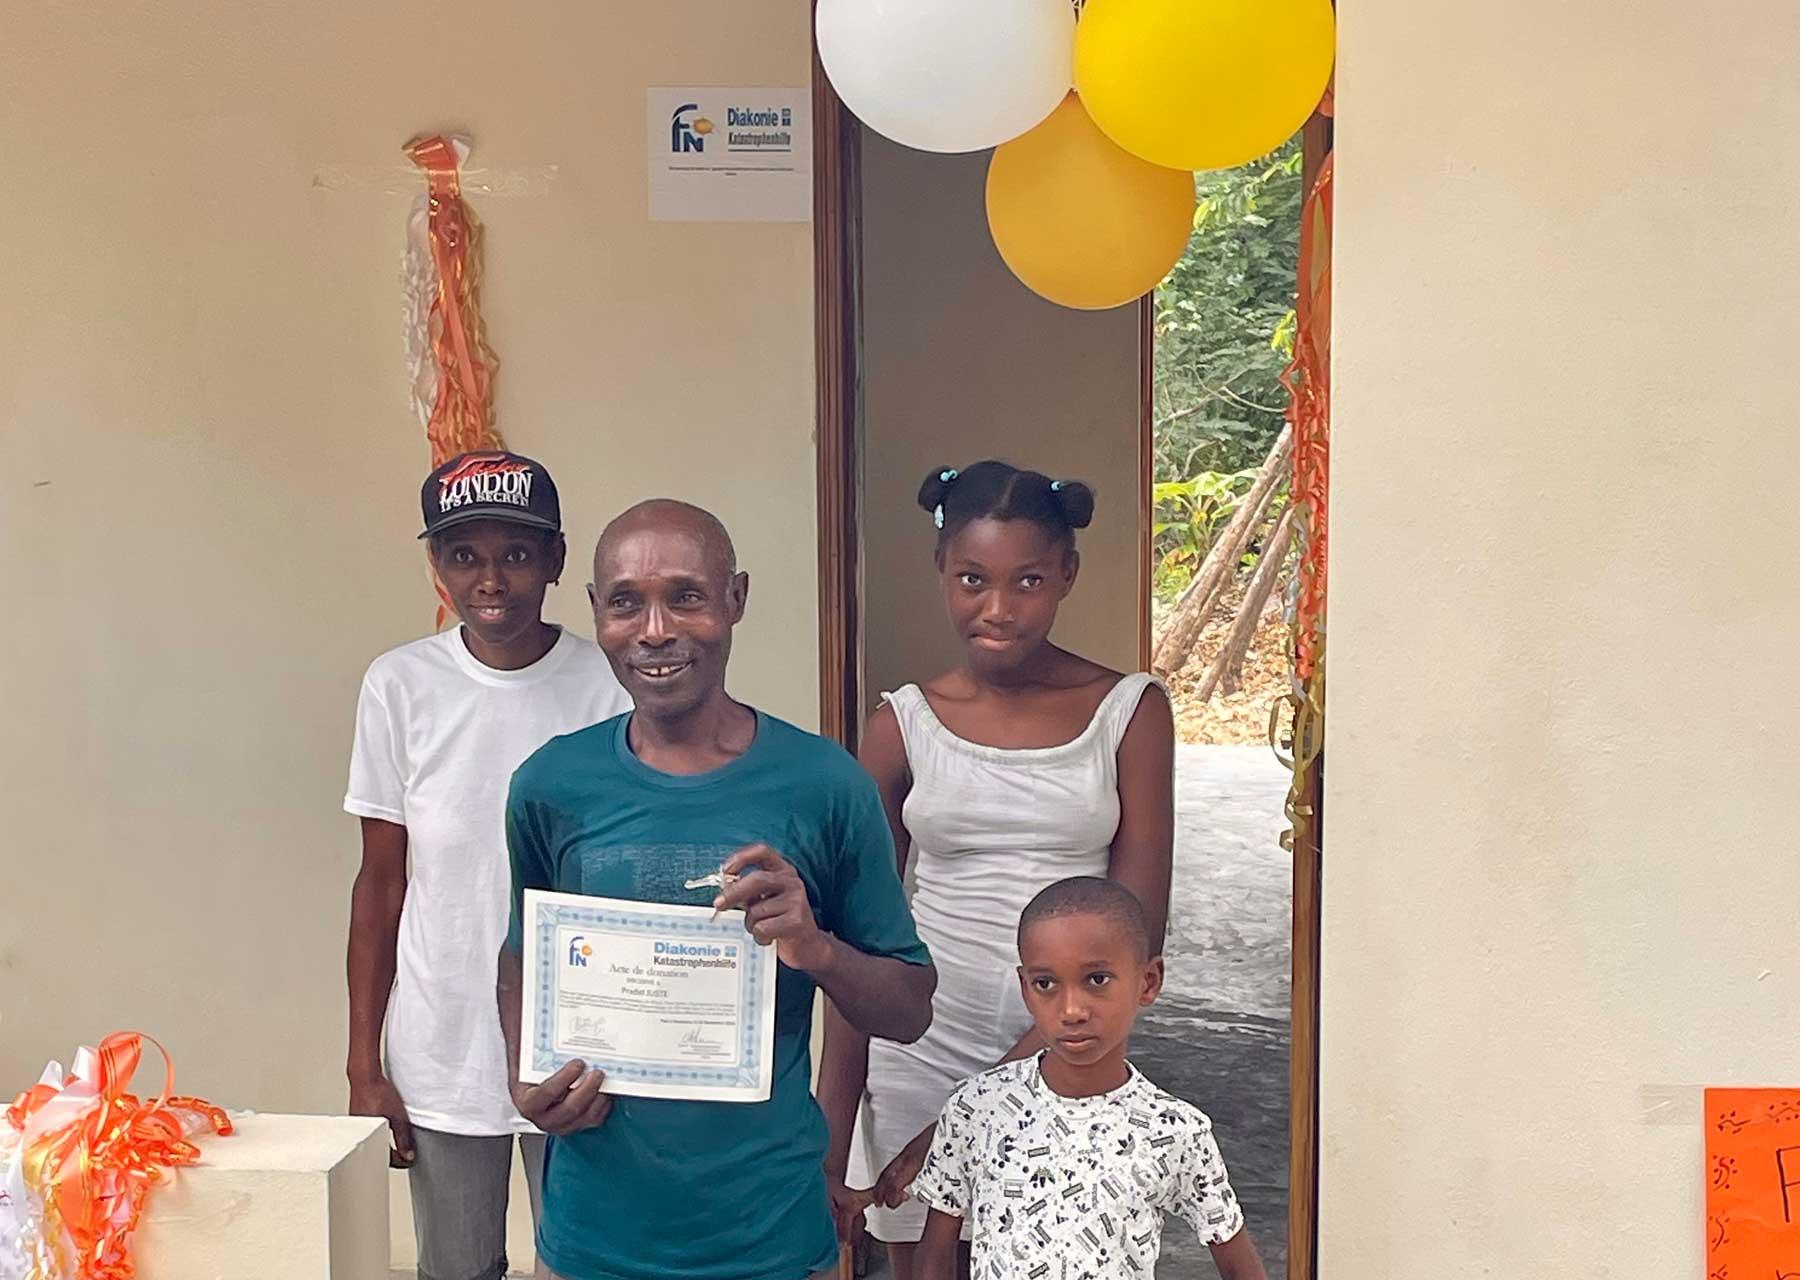 The Family Pradel, community of Fon Kochin, Grand Anse, received the key to their new house, built by the Joint Office as part of the response to the August 2021 earthquake. Also pictured is the shelter they have been living in for the past two years. Photo: LWF/ M. French